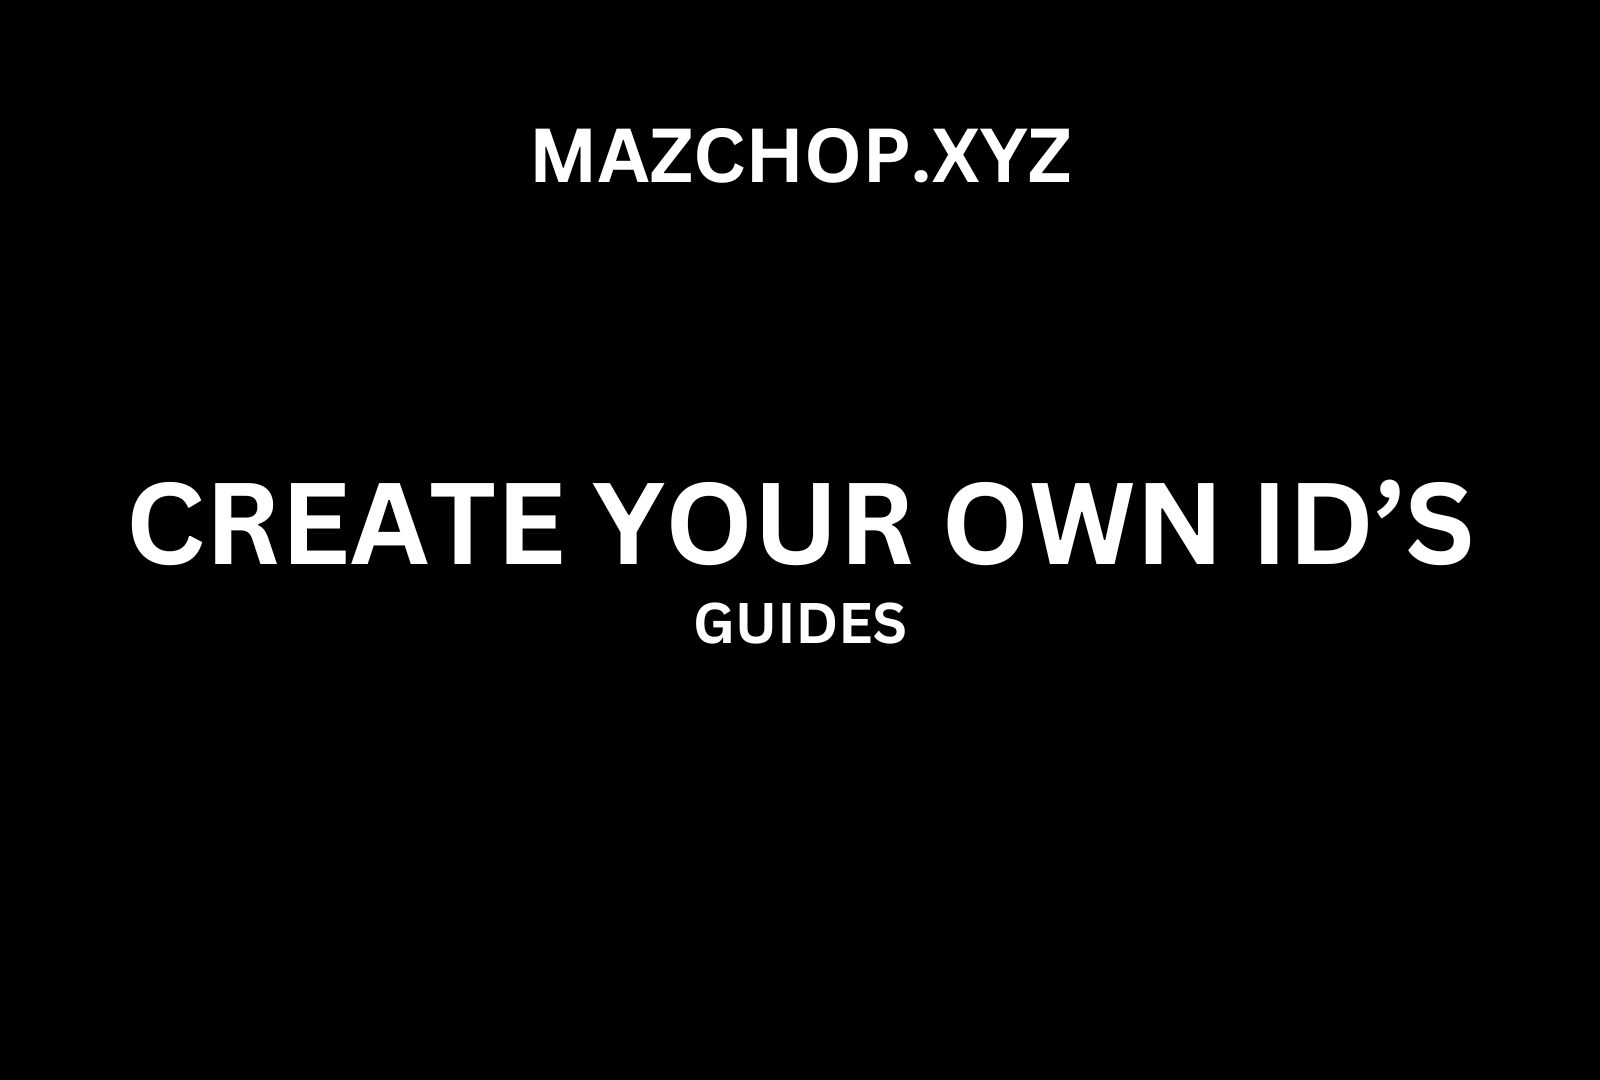 How To Make Your Own Physical IDs